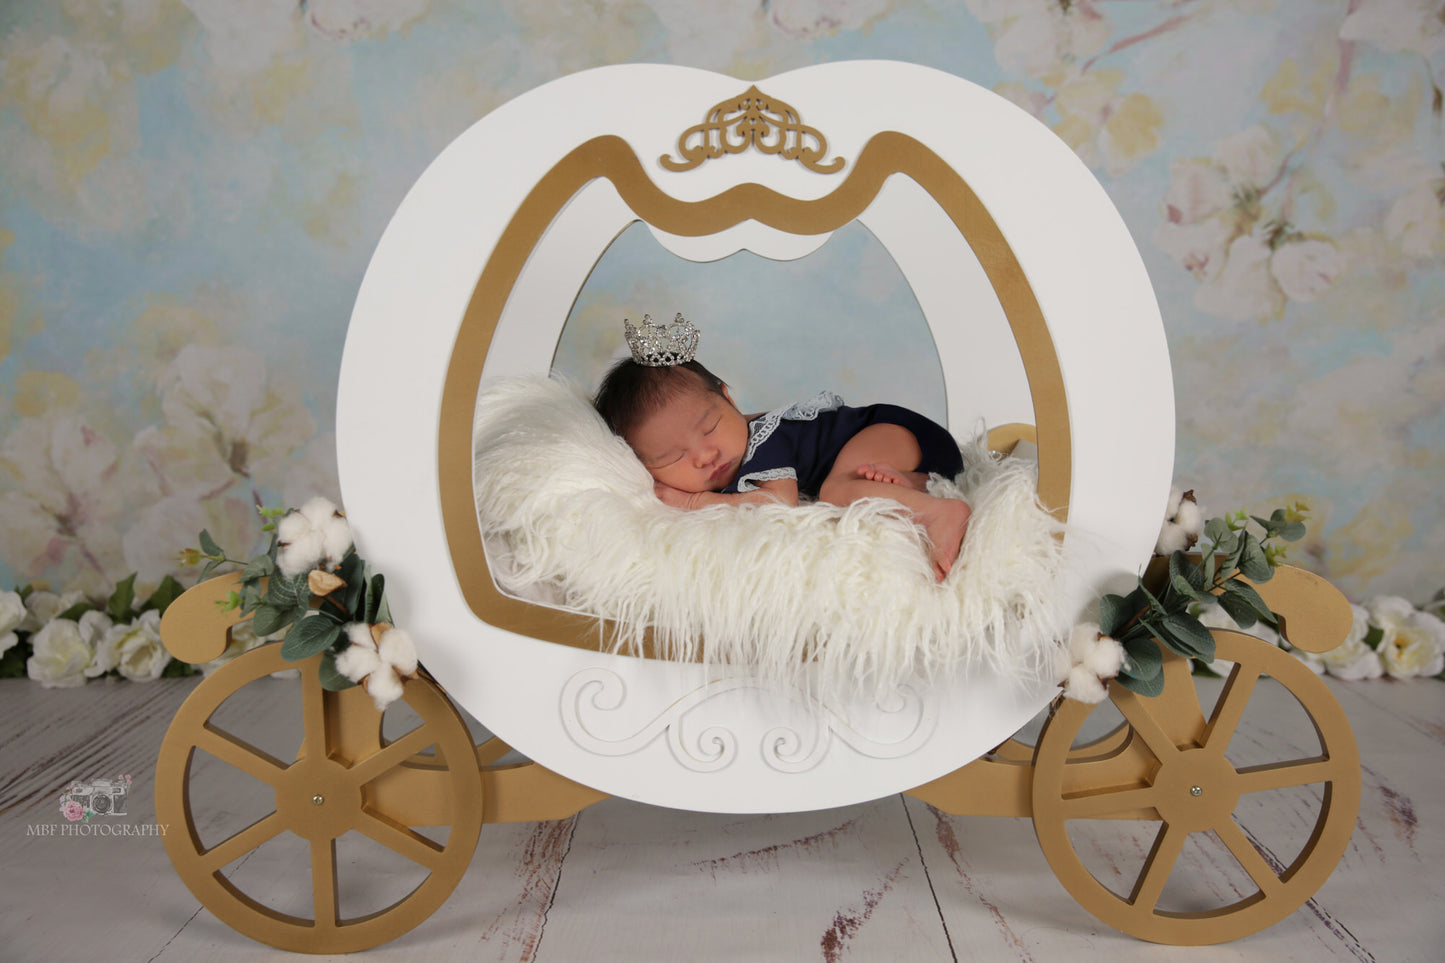 This princess carriage prop for newborn photography is perfect for any little princess OR prince! Add a few flower bundles and a simple backdrop or setup a lovely fantasy backdrop with pumpkins all around. This carriage is definitely the best prop to wow your clients.